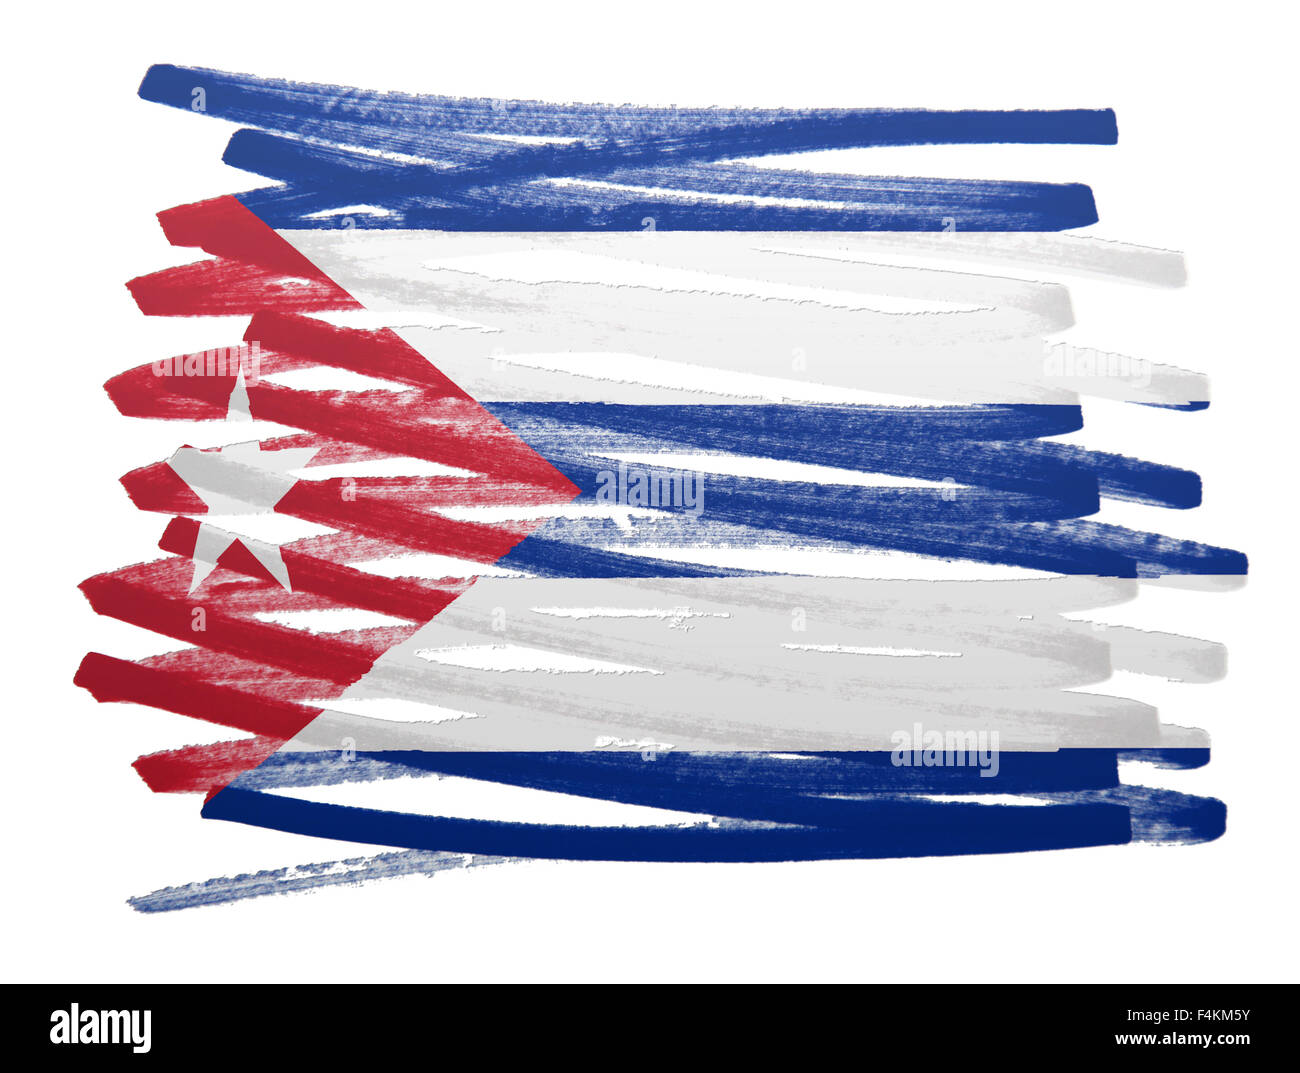 Flag illustration made with pen - Cuba Stock Photo